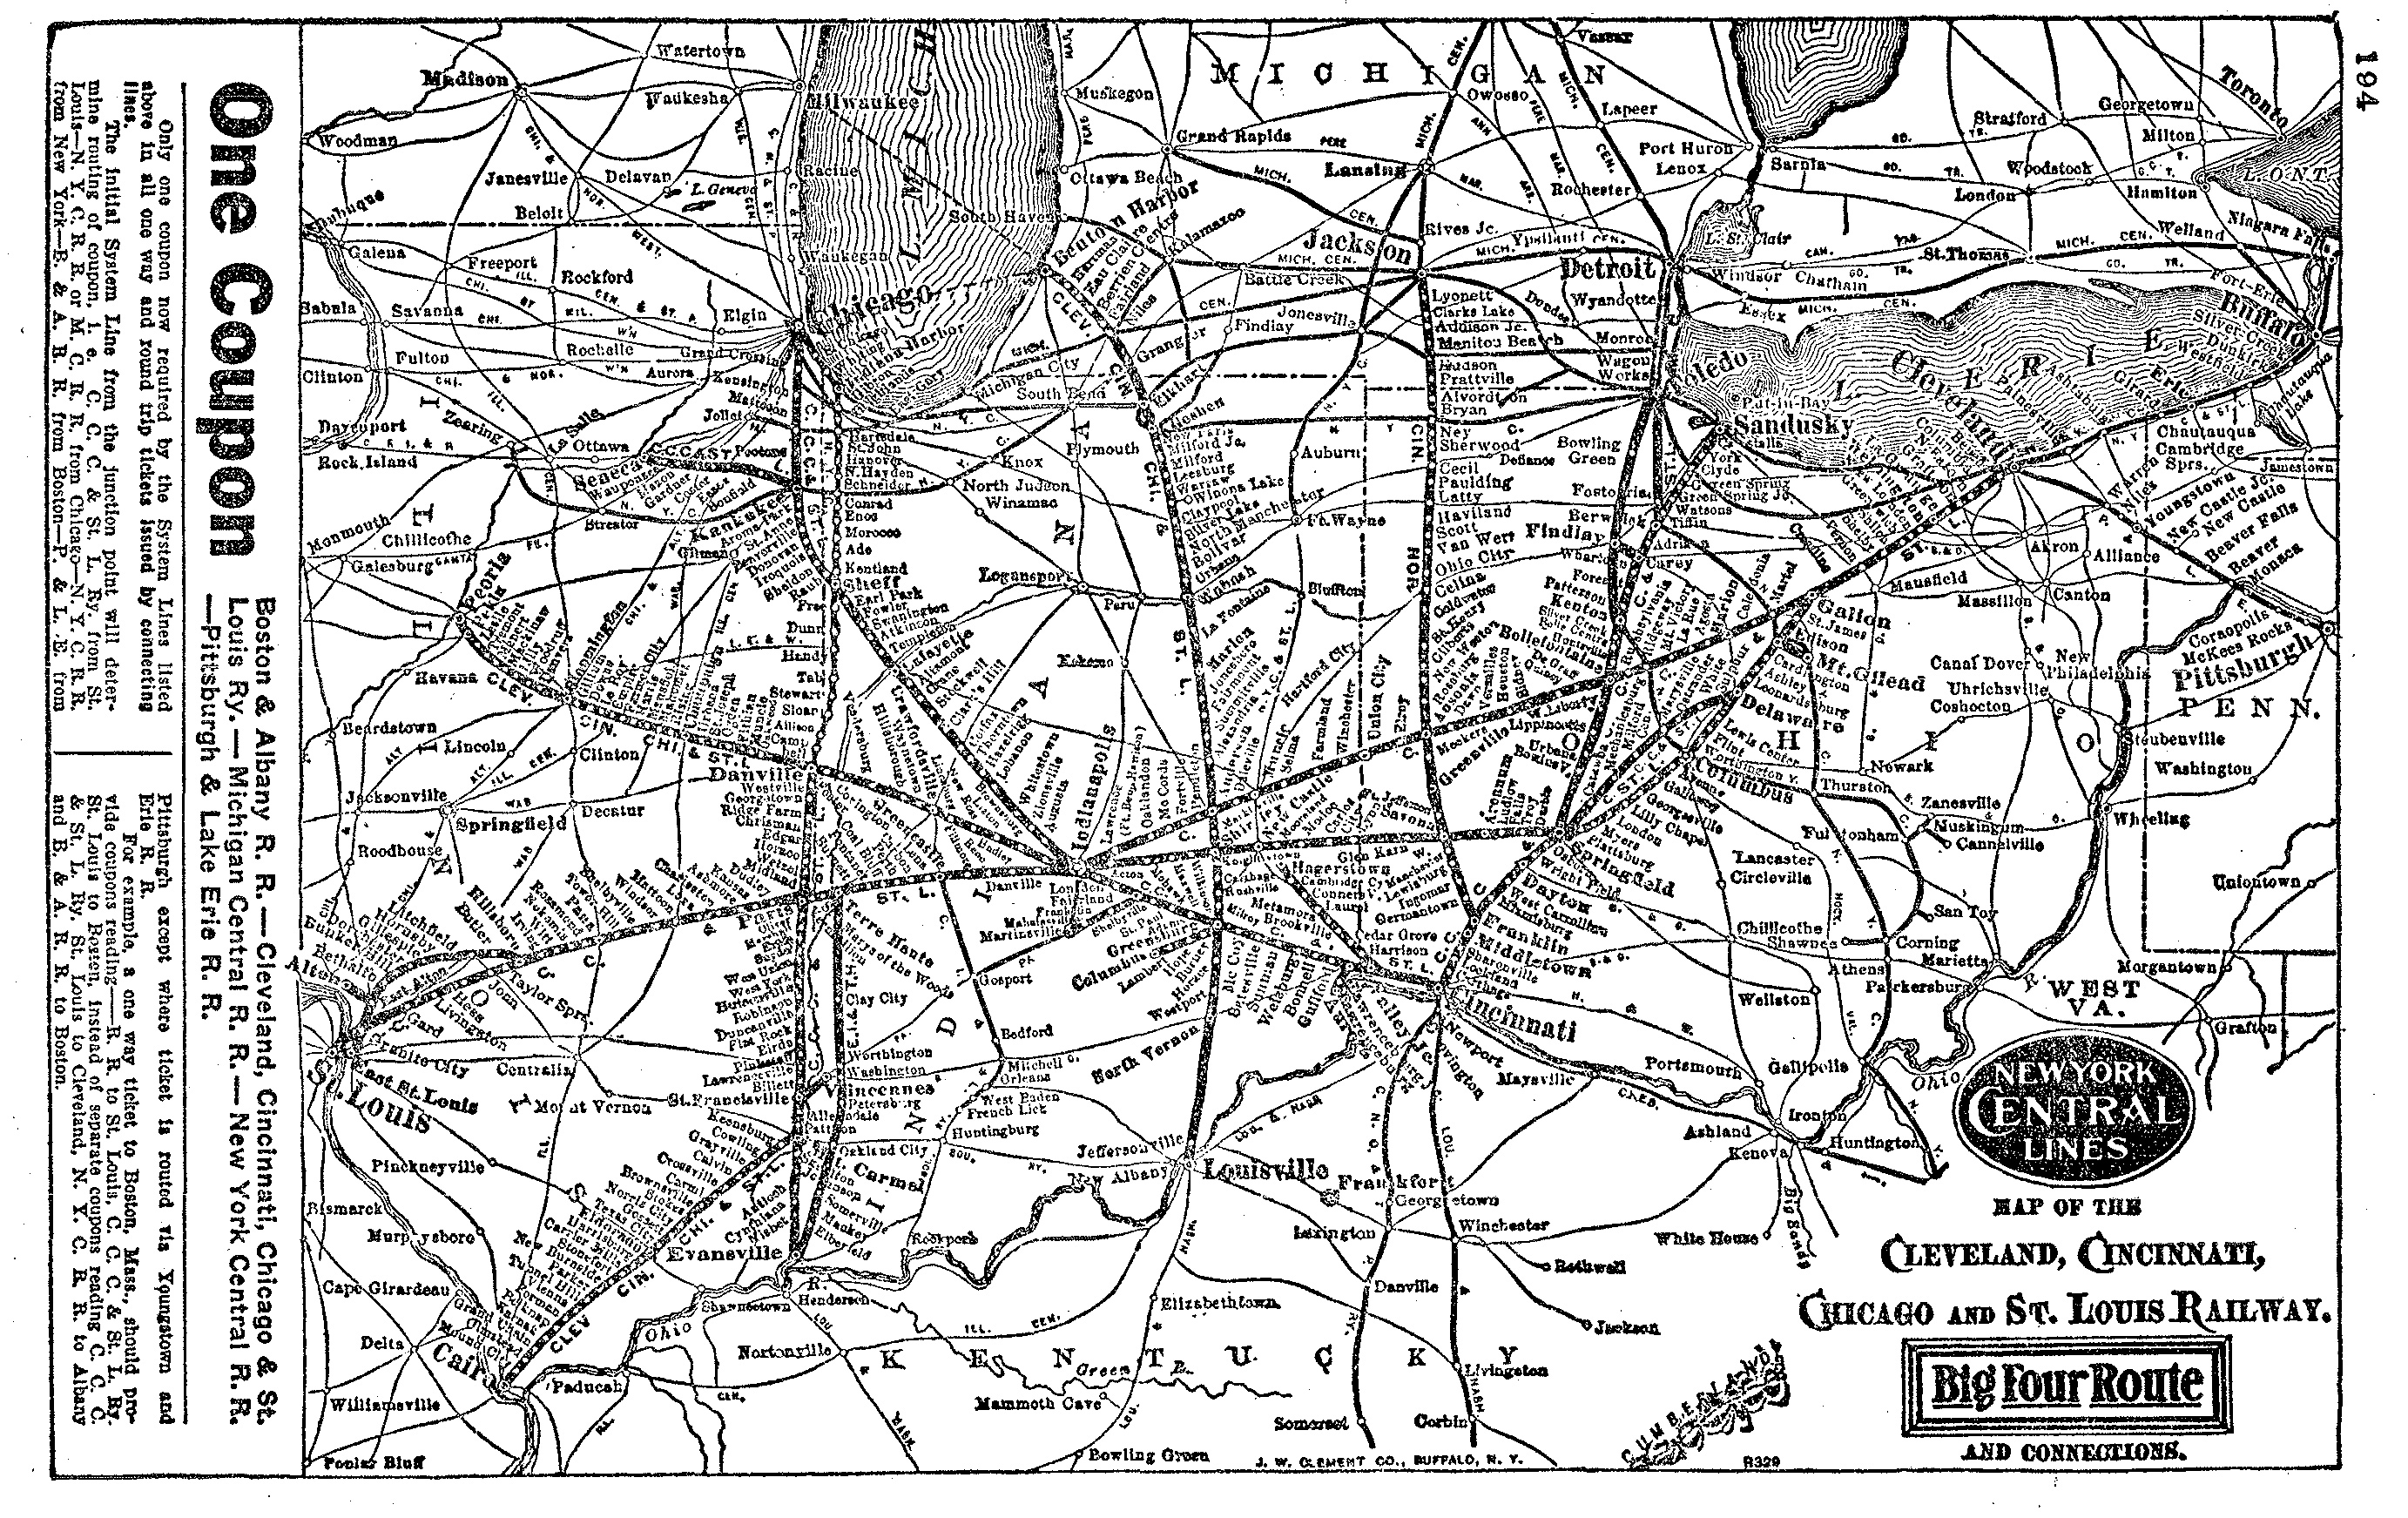 File:Cleveland, Cincinnati, Chicago and St. Louis Railway system map  (1918).svg - Wikipedia